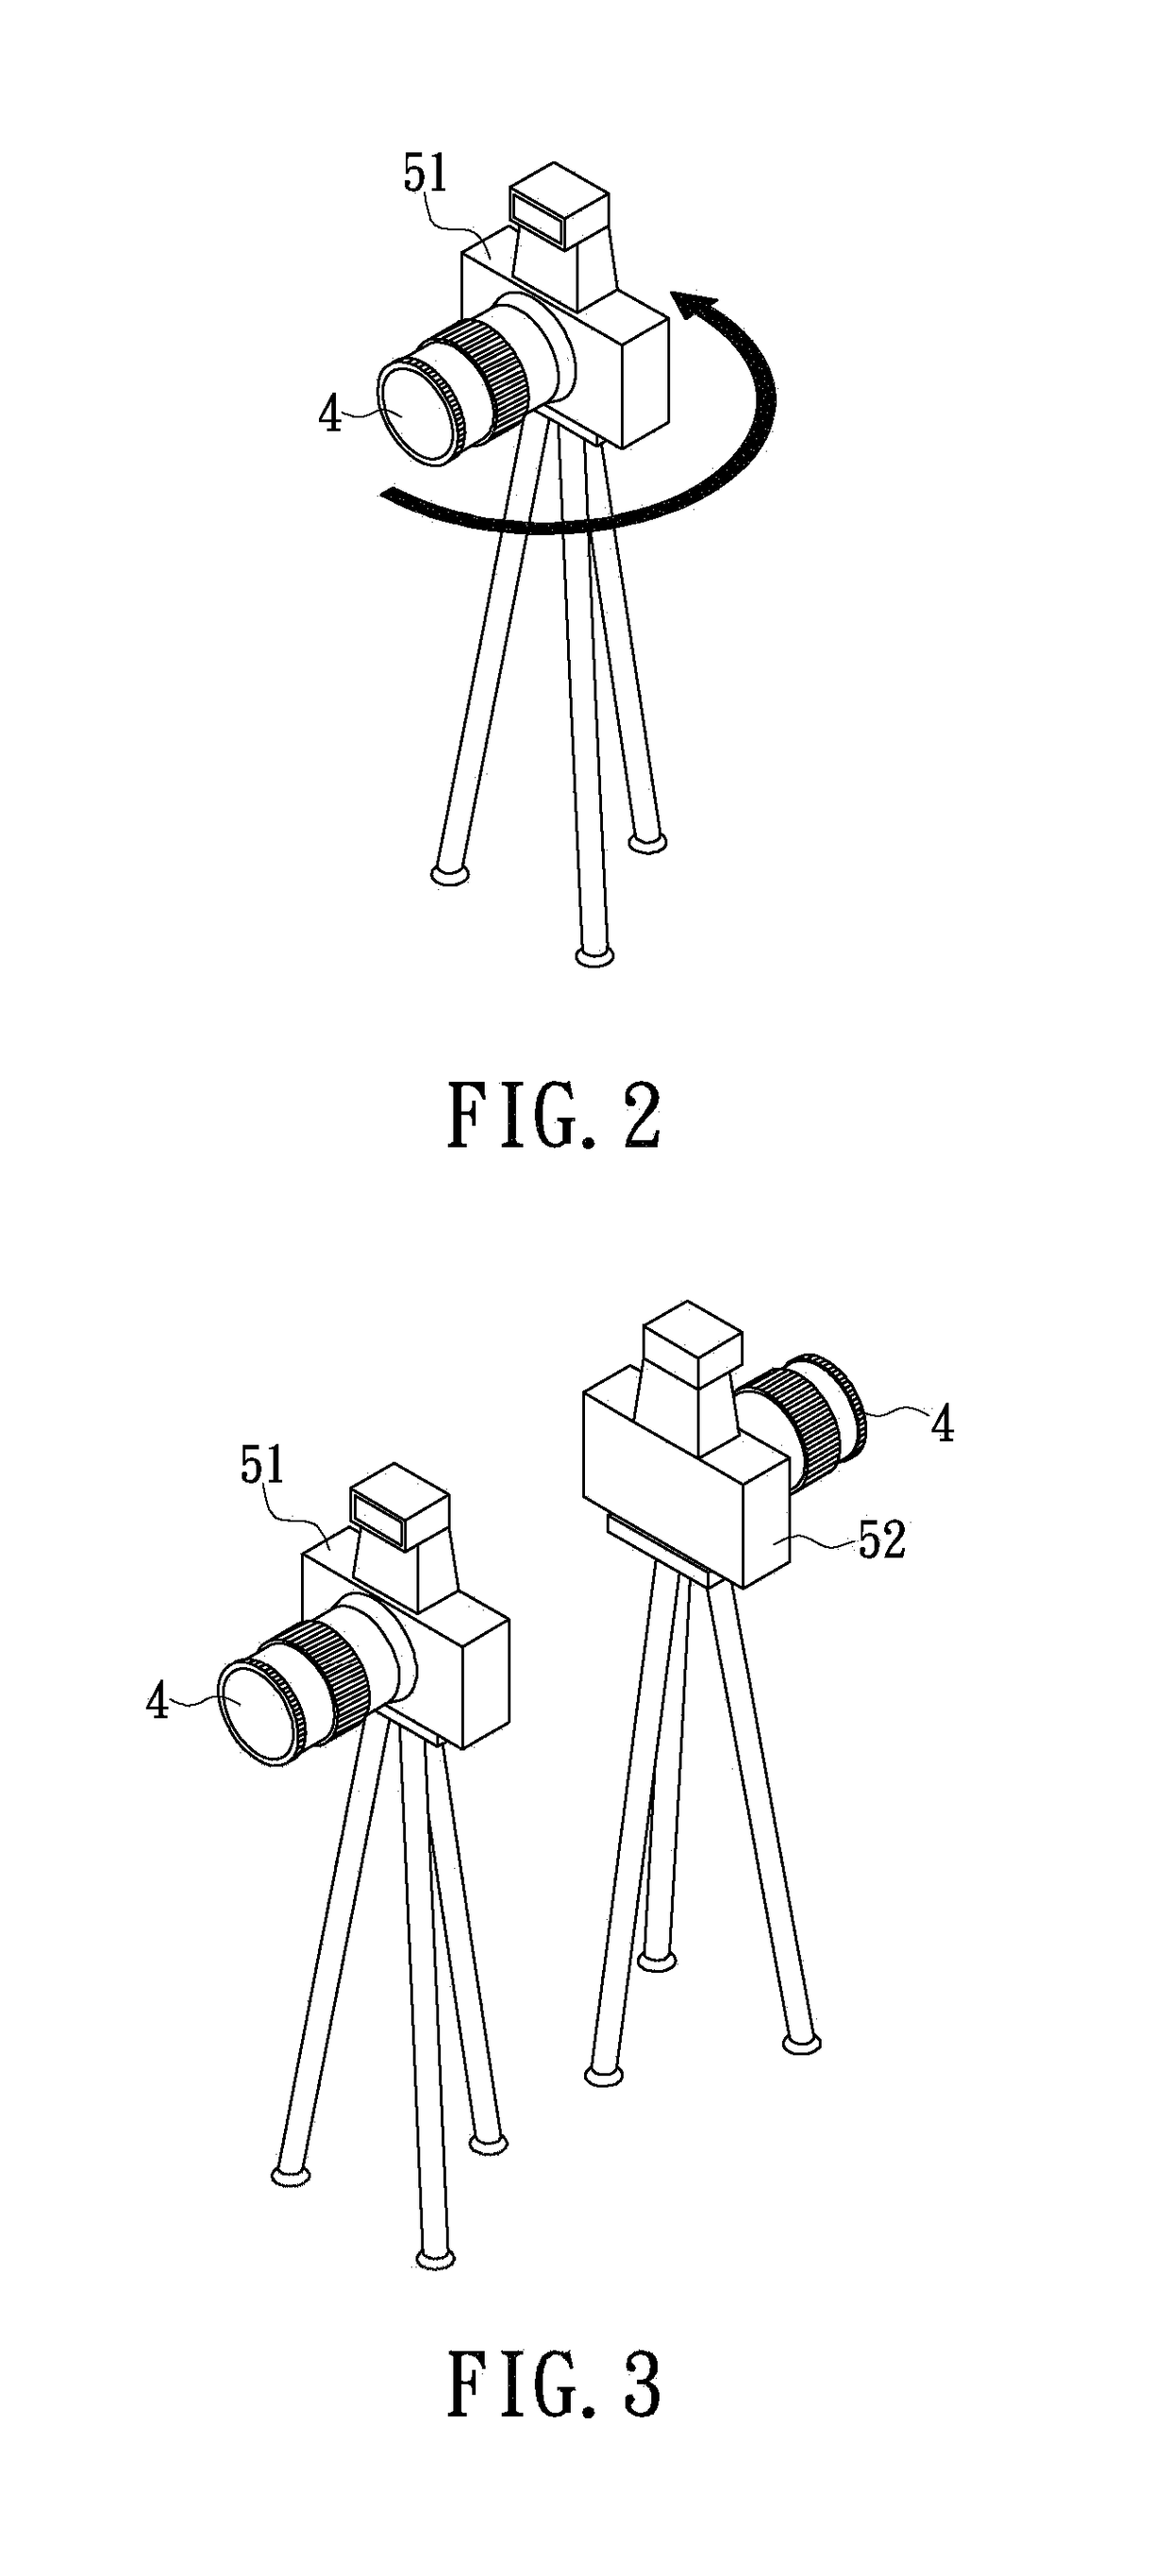 Method for stitching together images taken through fisheye lens in order to produce 360-degree spherical panorama